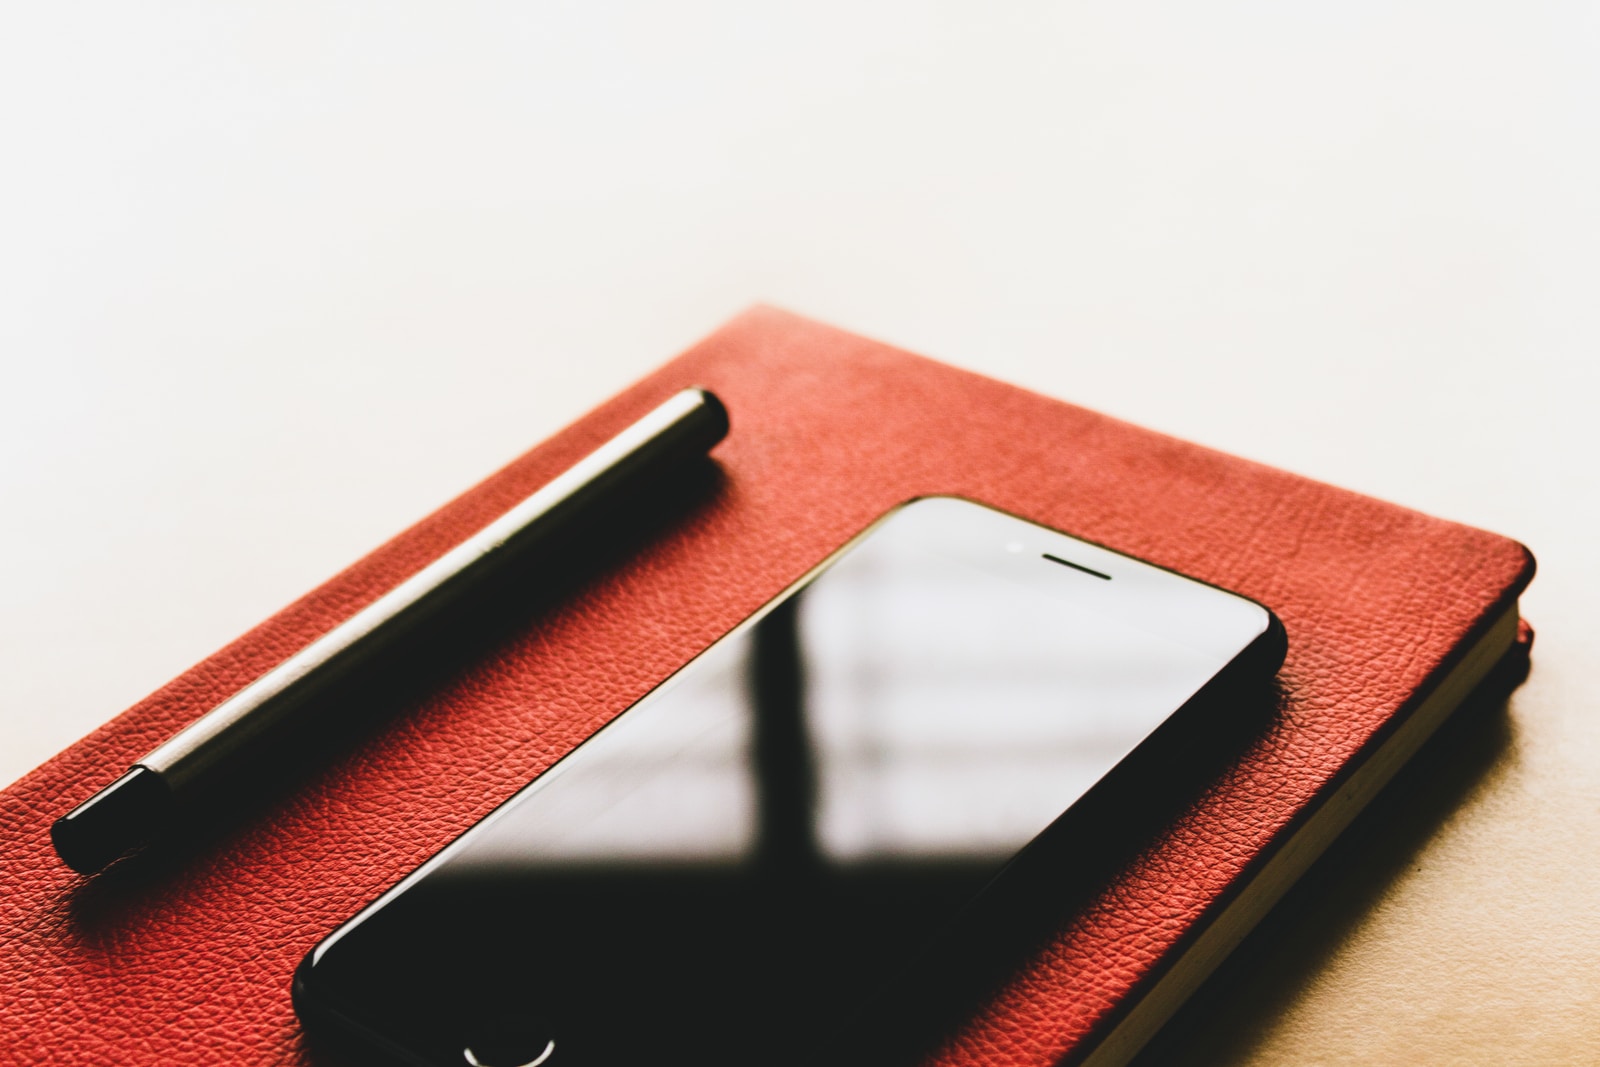 black iPhone on red book